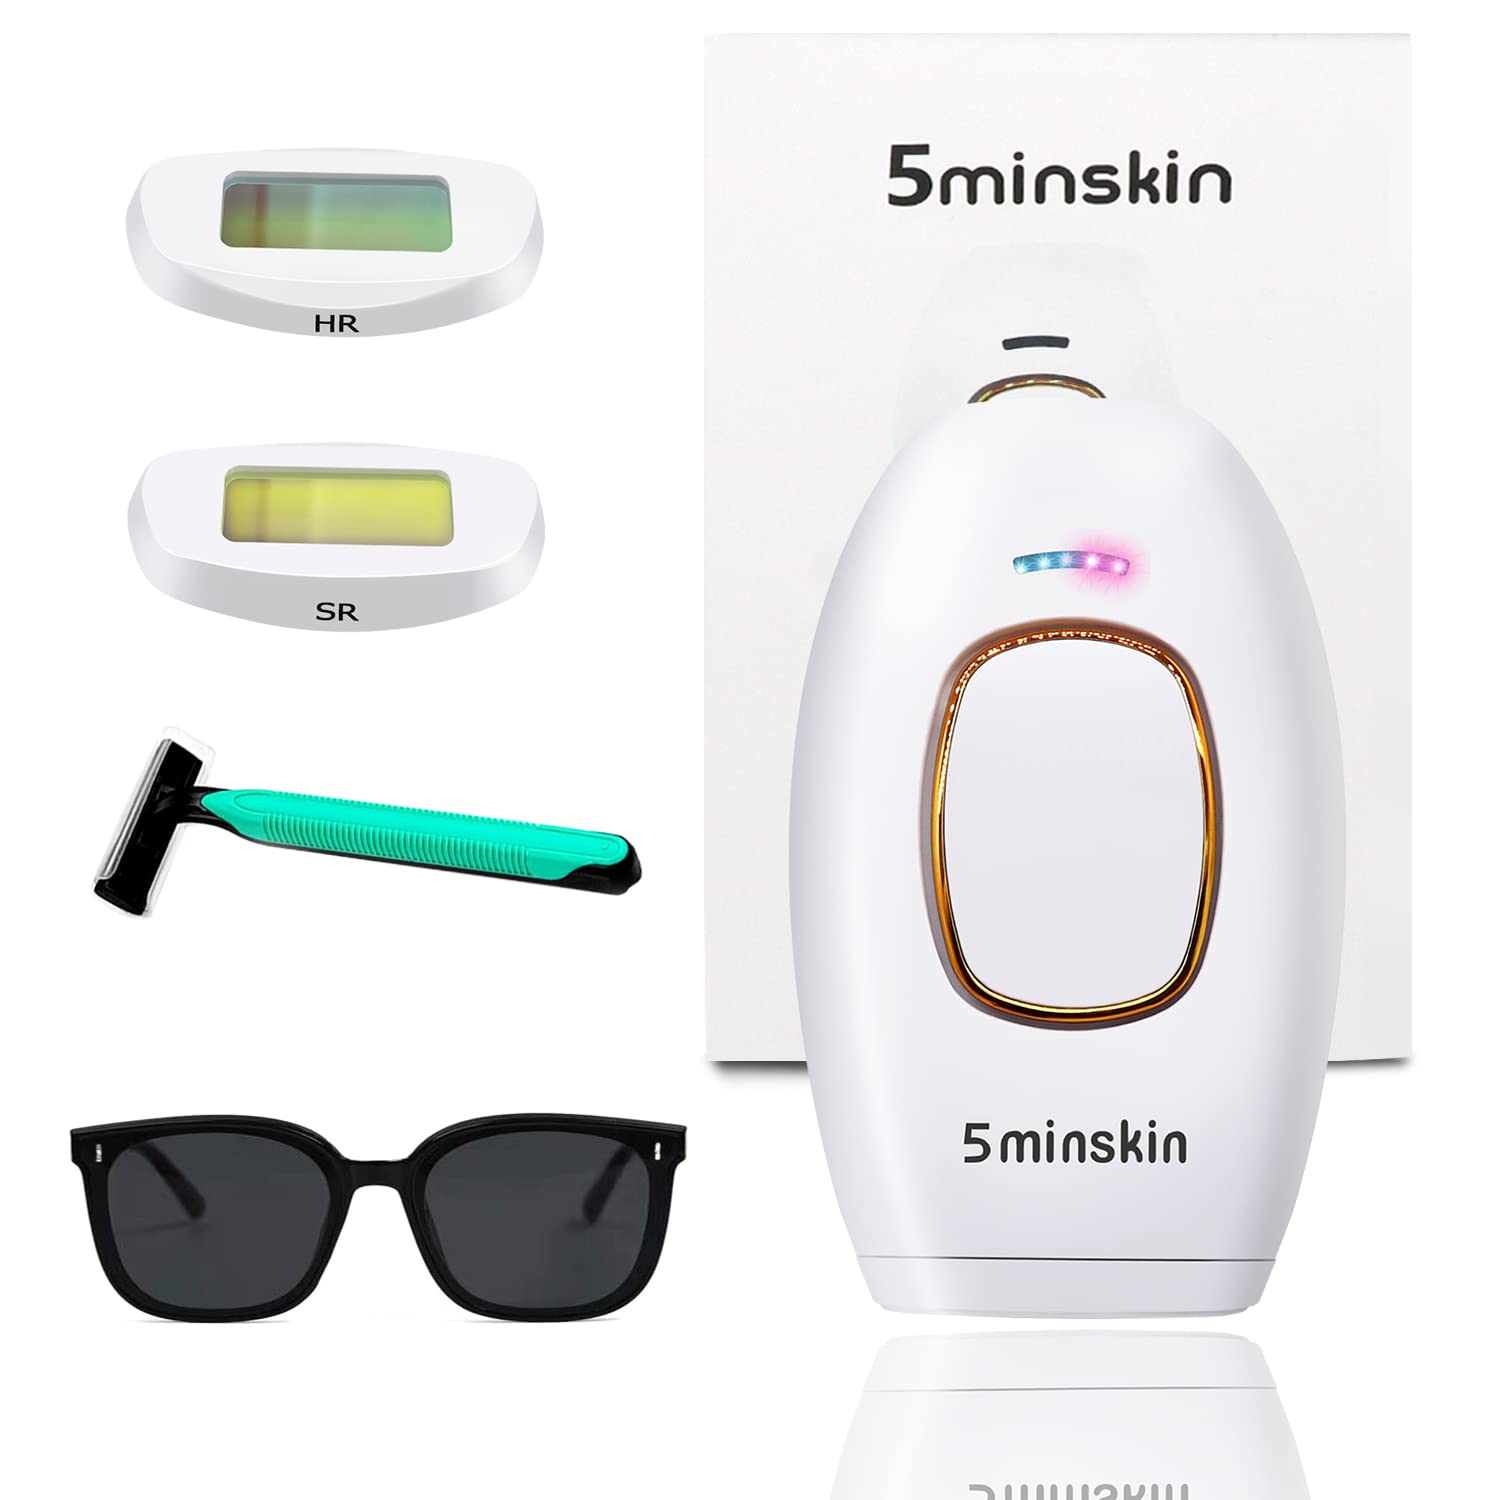 Laser Hair Removal from home with @5minskin #5minskin I cannot wait to